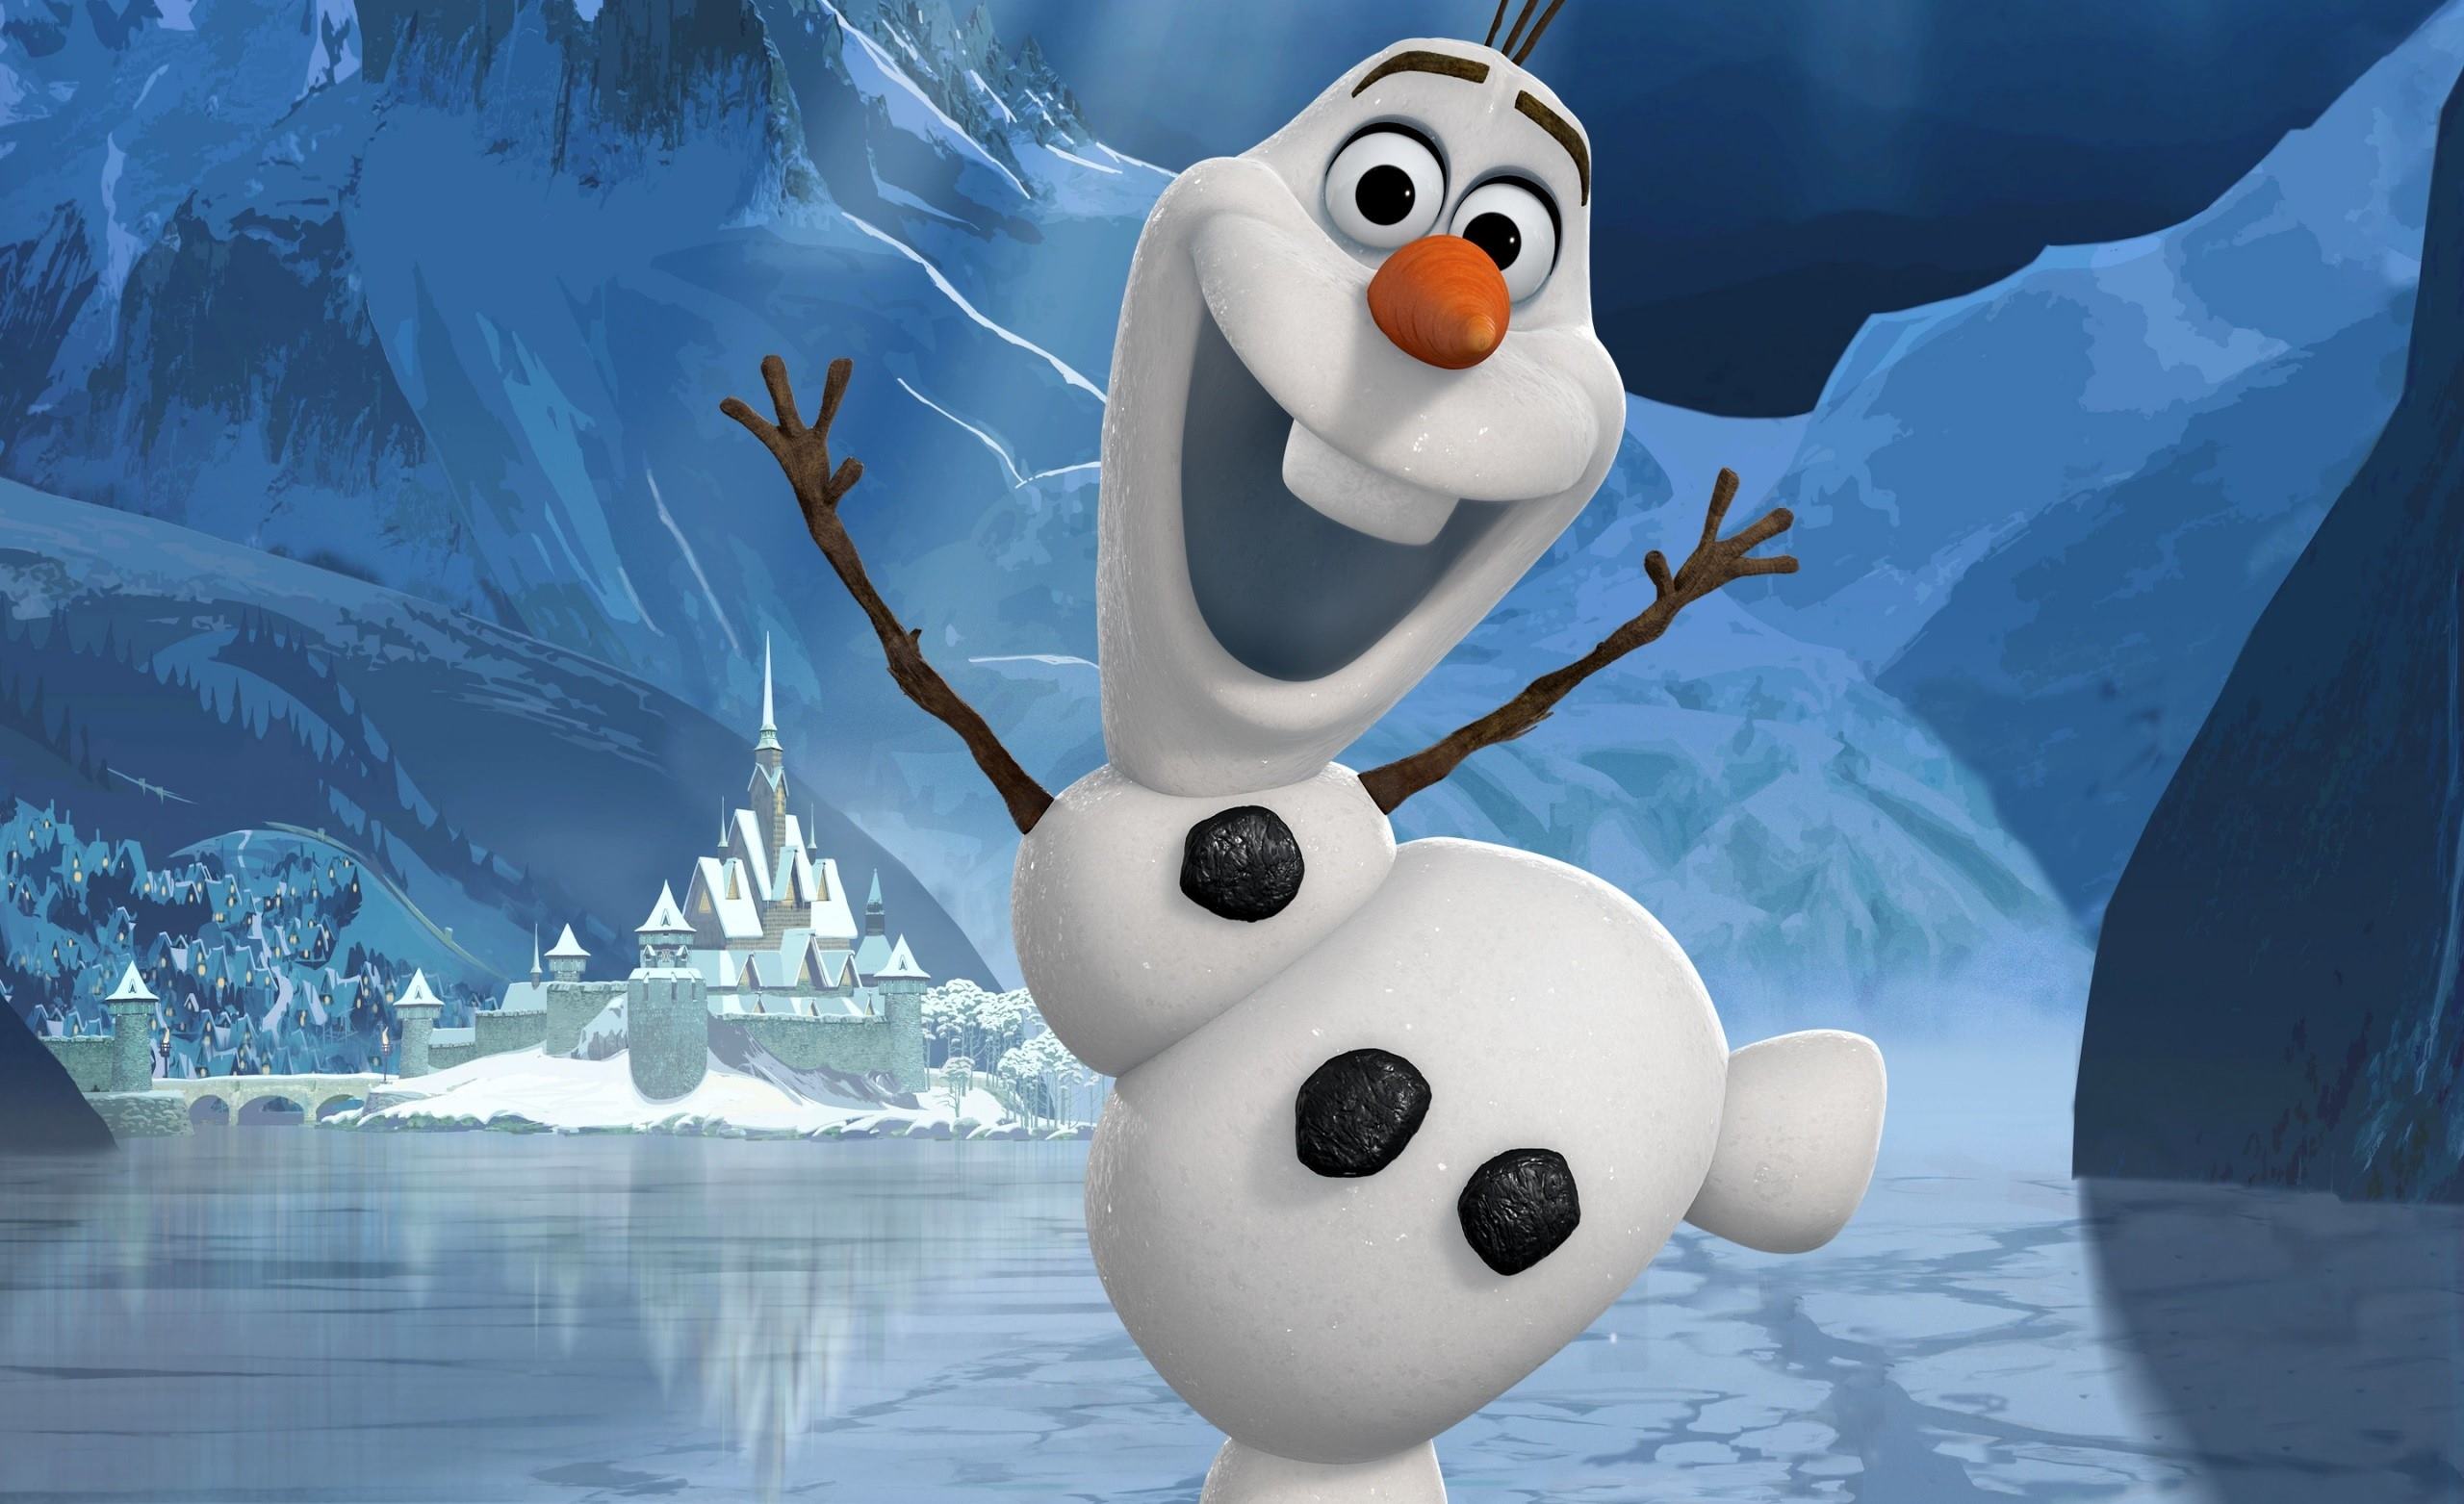 How Tall Is Olaf? And Other Frozen Questions Answered